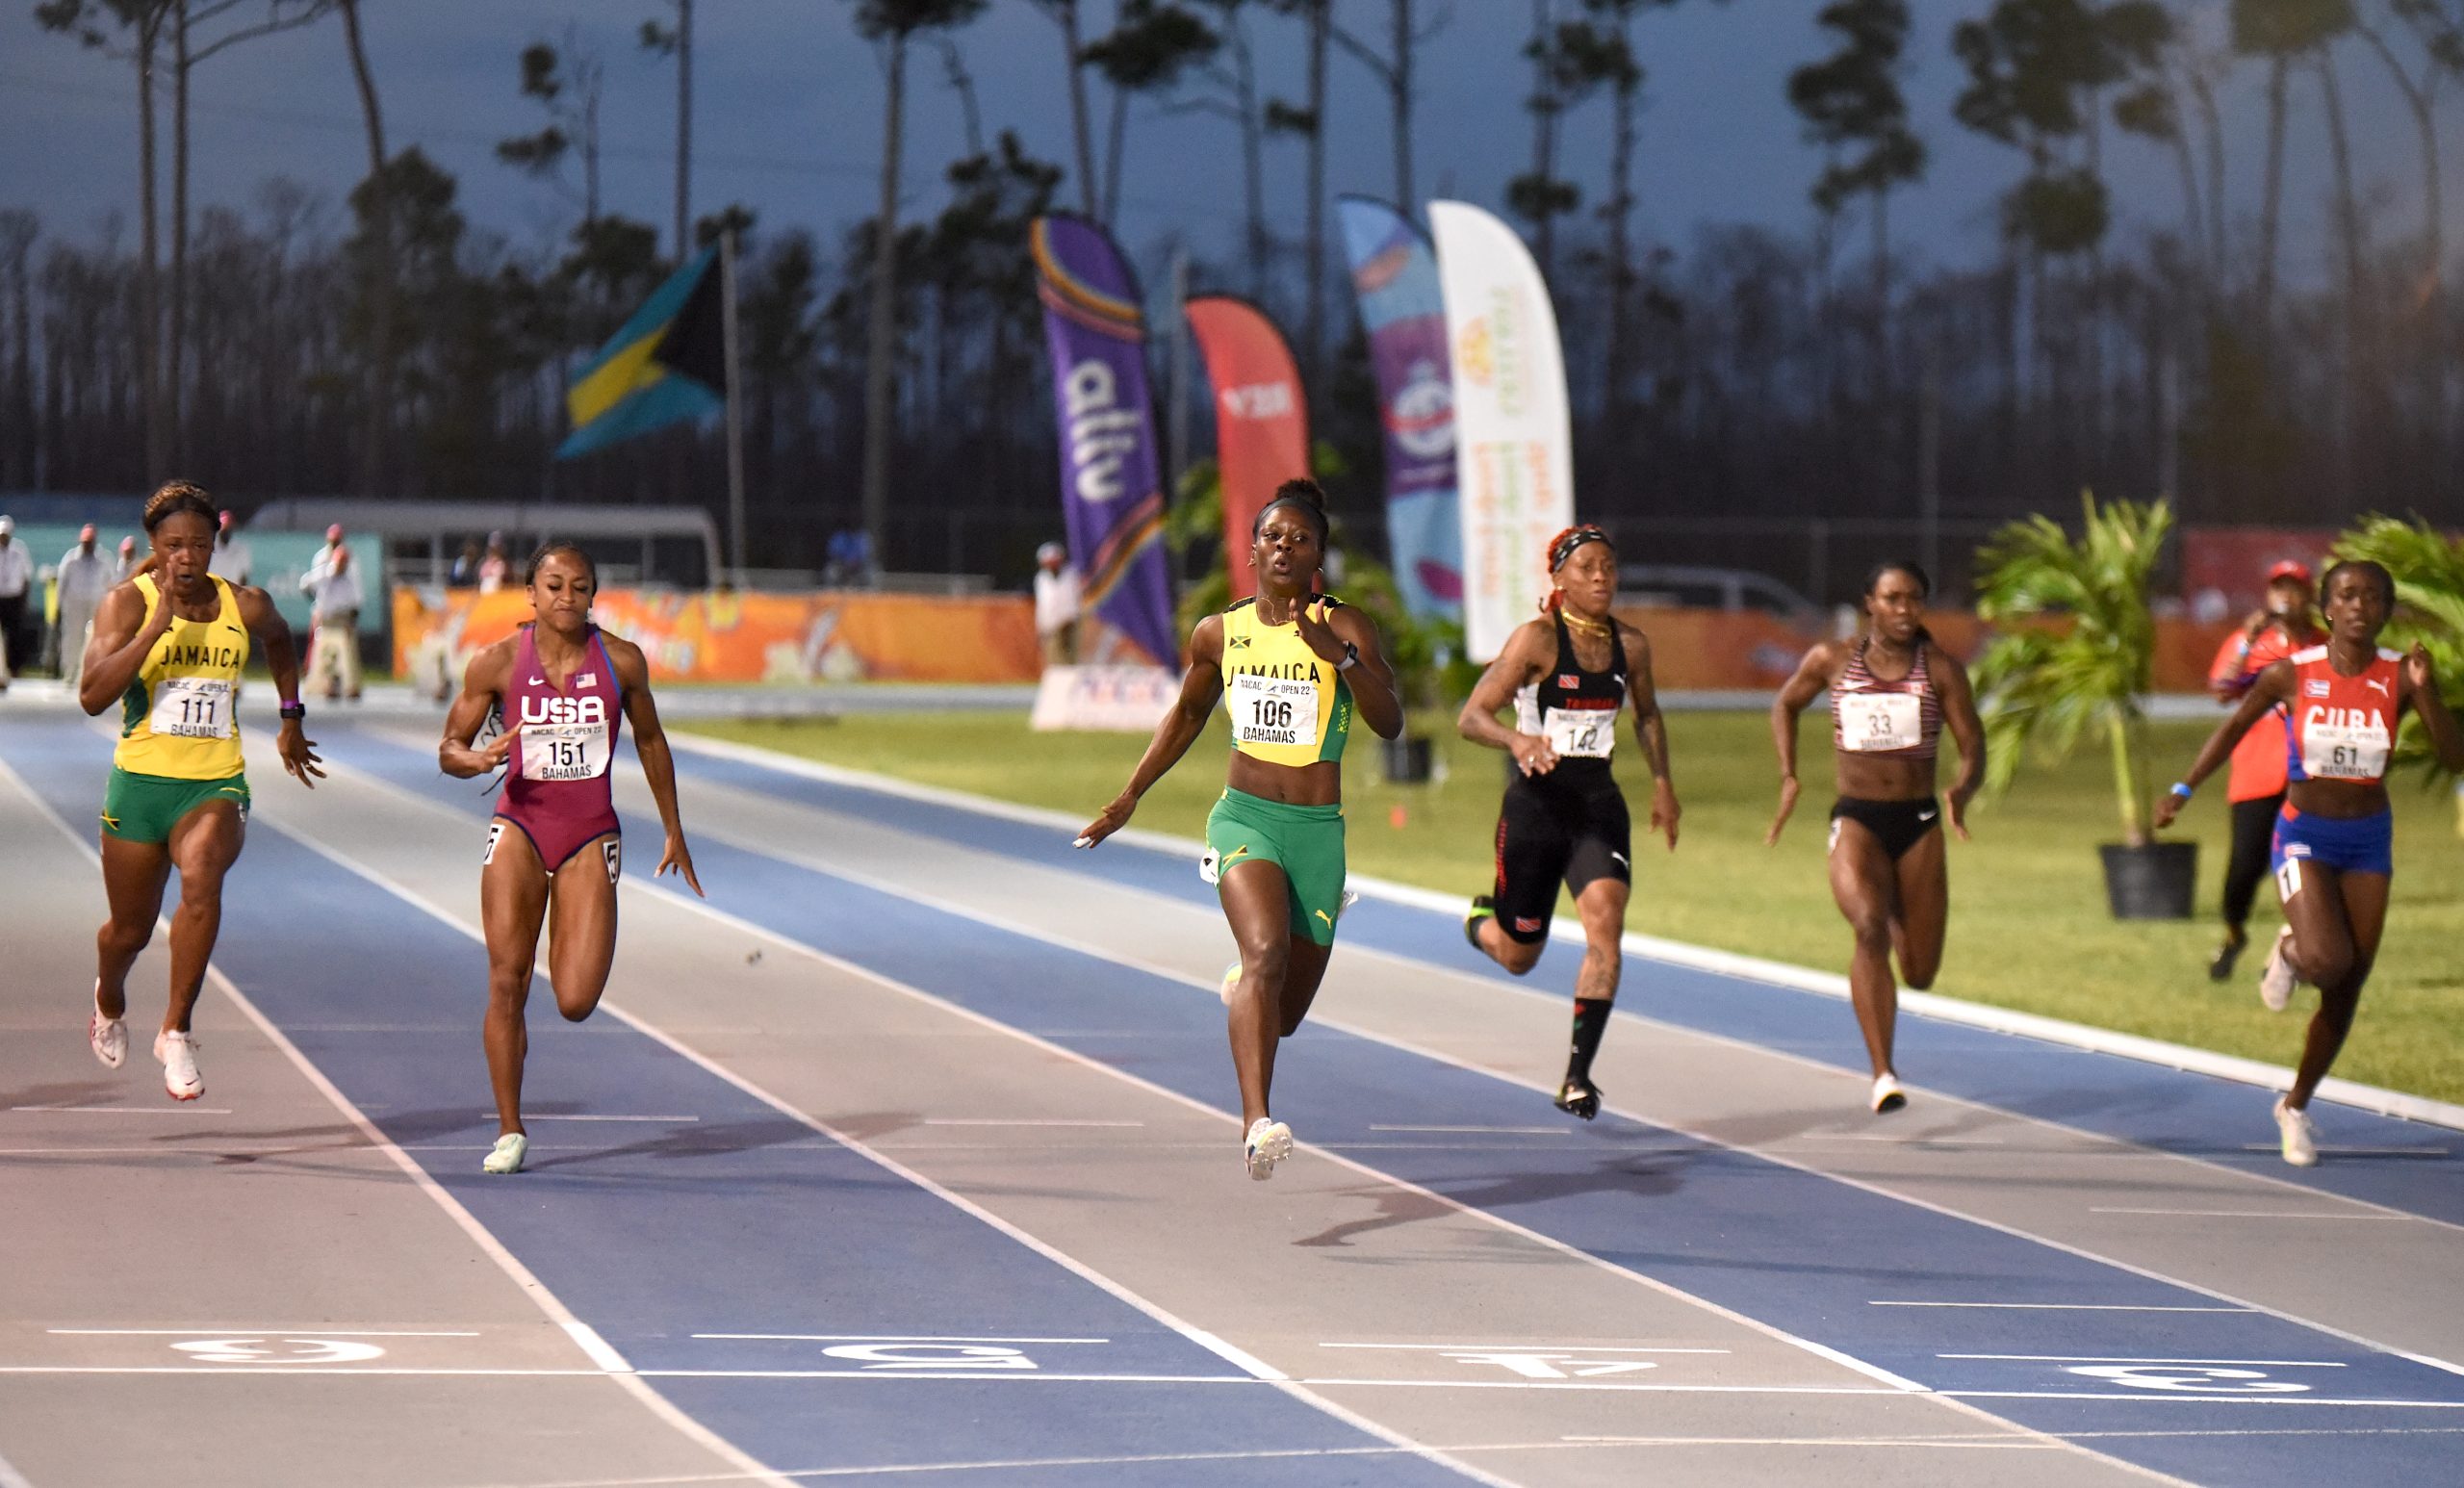 Shericka Jackson wins the women's 100m in a championship record 10.83 at the NACAC Open Championships in Freeport, Grand Bahamas